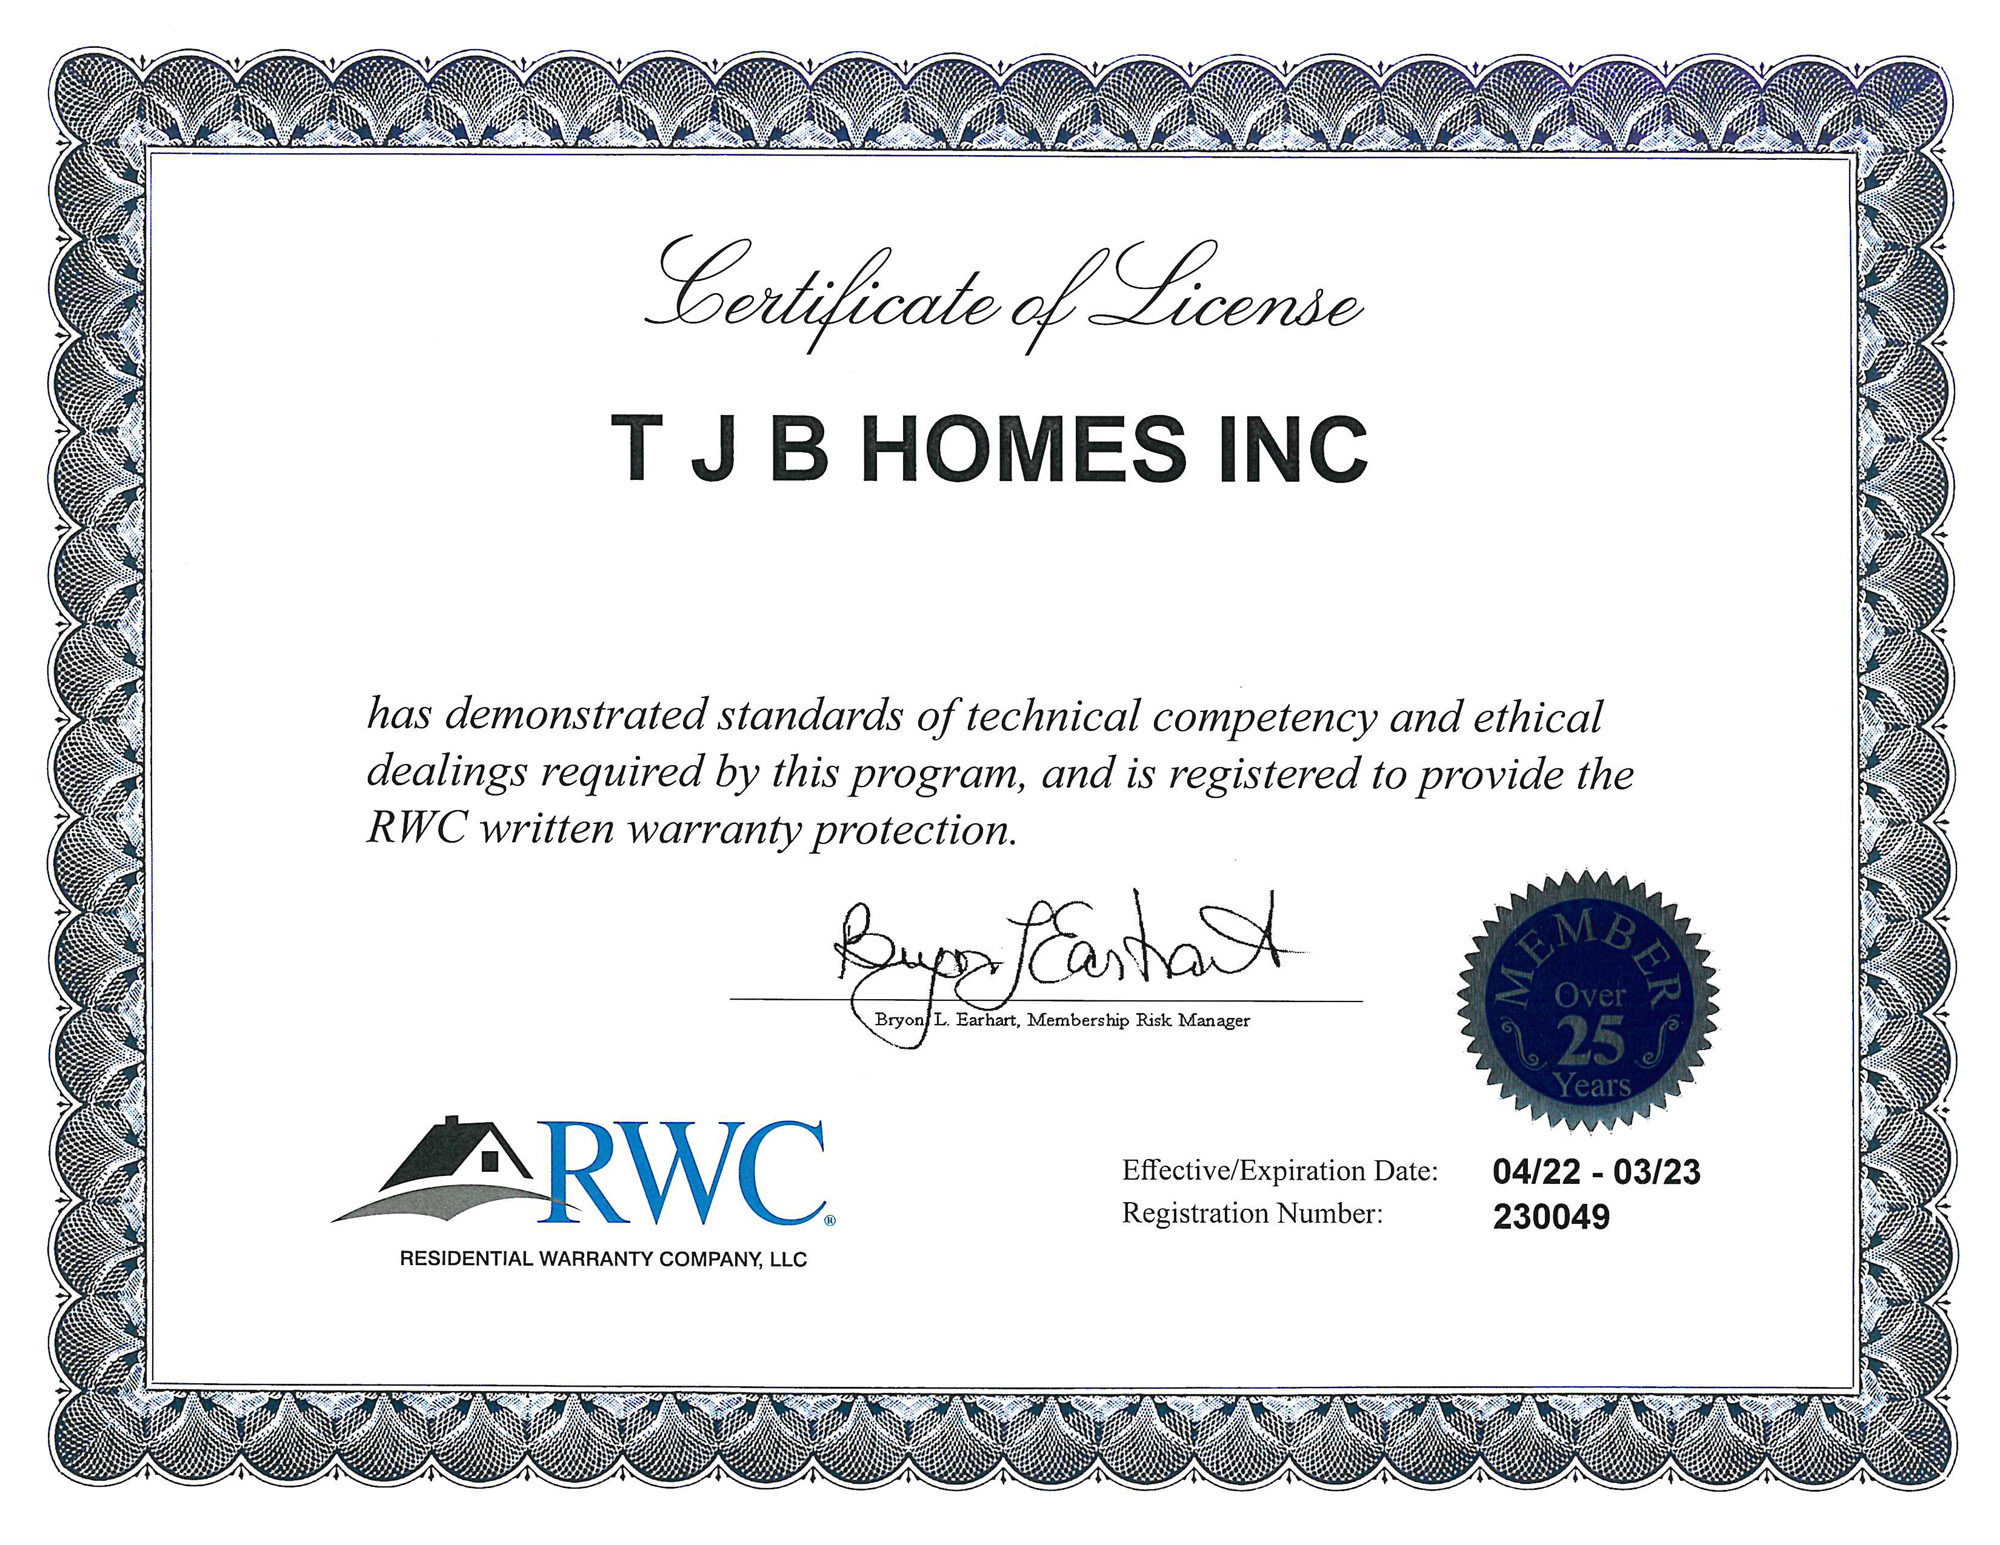 TJB Homes has demonstrated standards of technical competency and ethical dealings required by this program, and is registered to provide the RWC written warranty protection